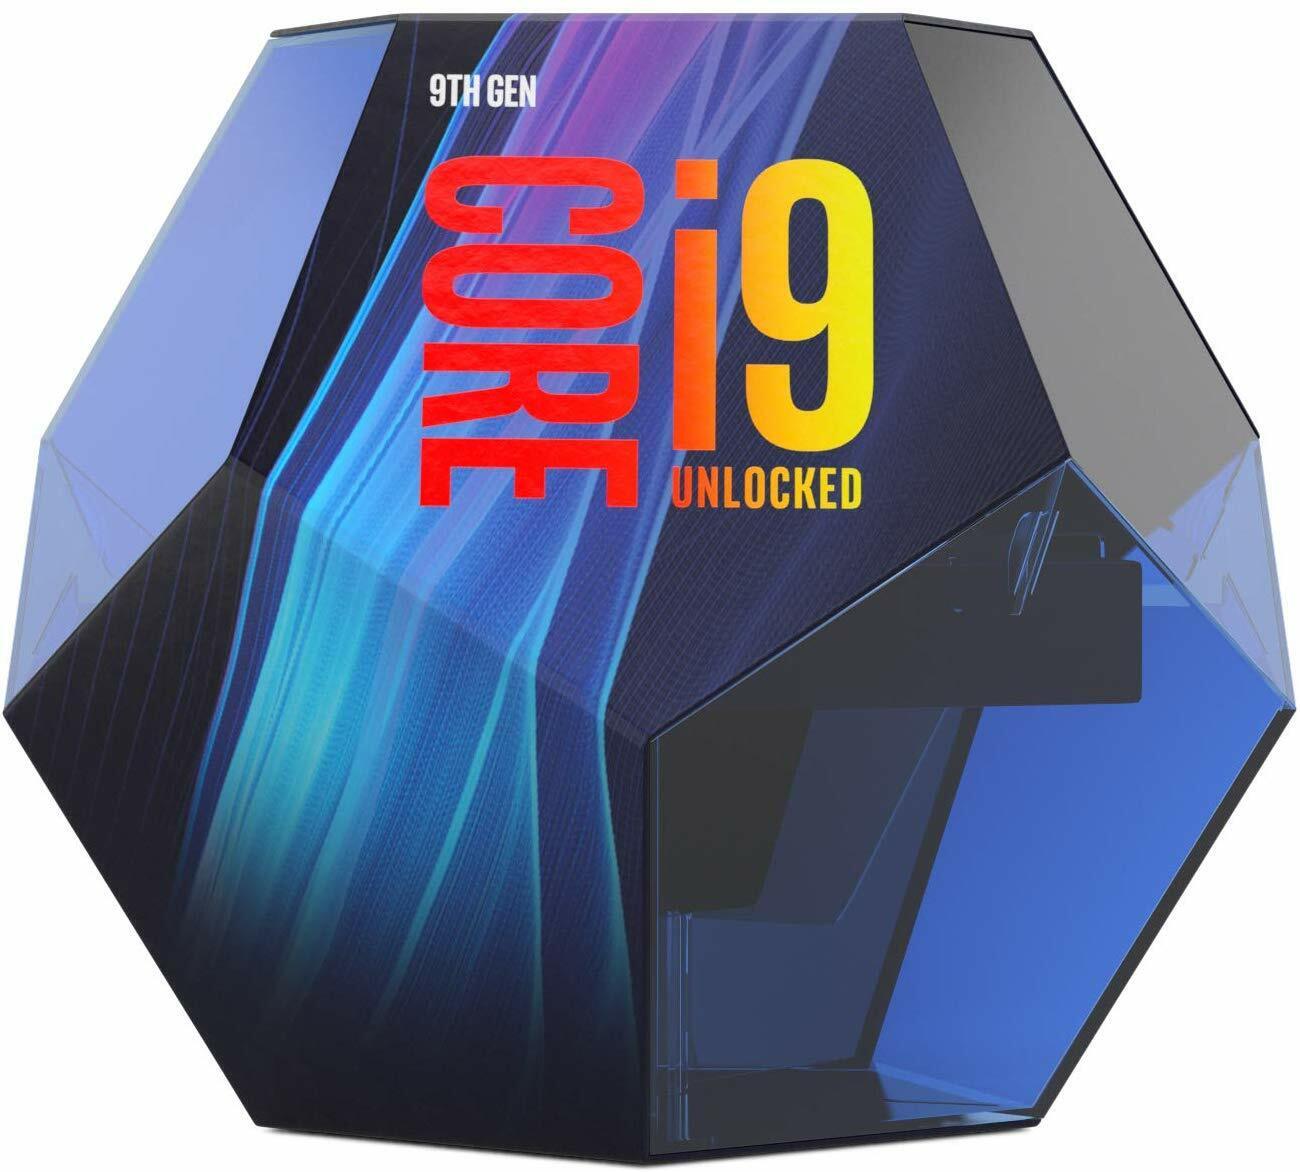 Intel Core i9-9900K Desktop Processor - 8 cores & 16 threads - Up to 5 GHz Turbo